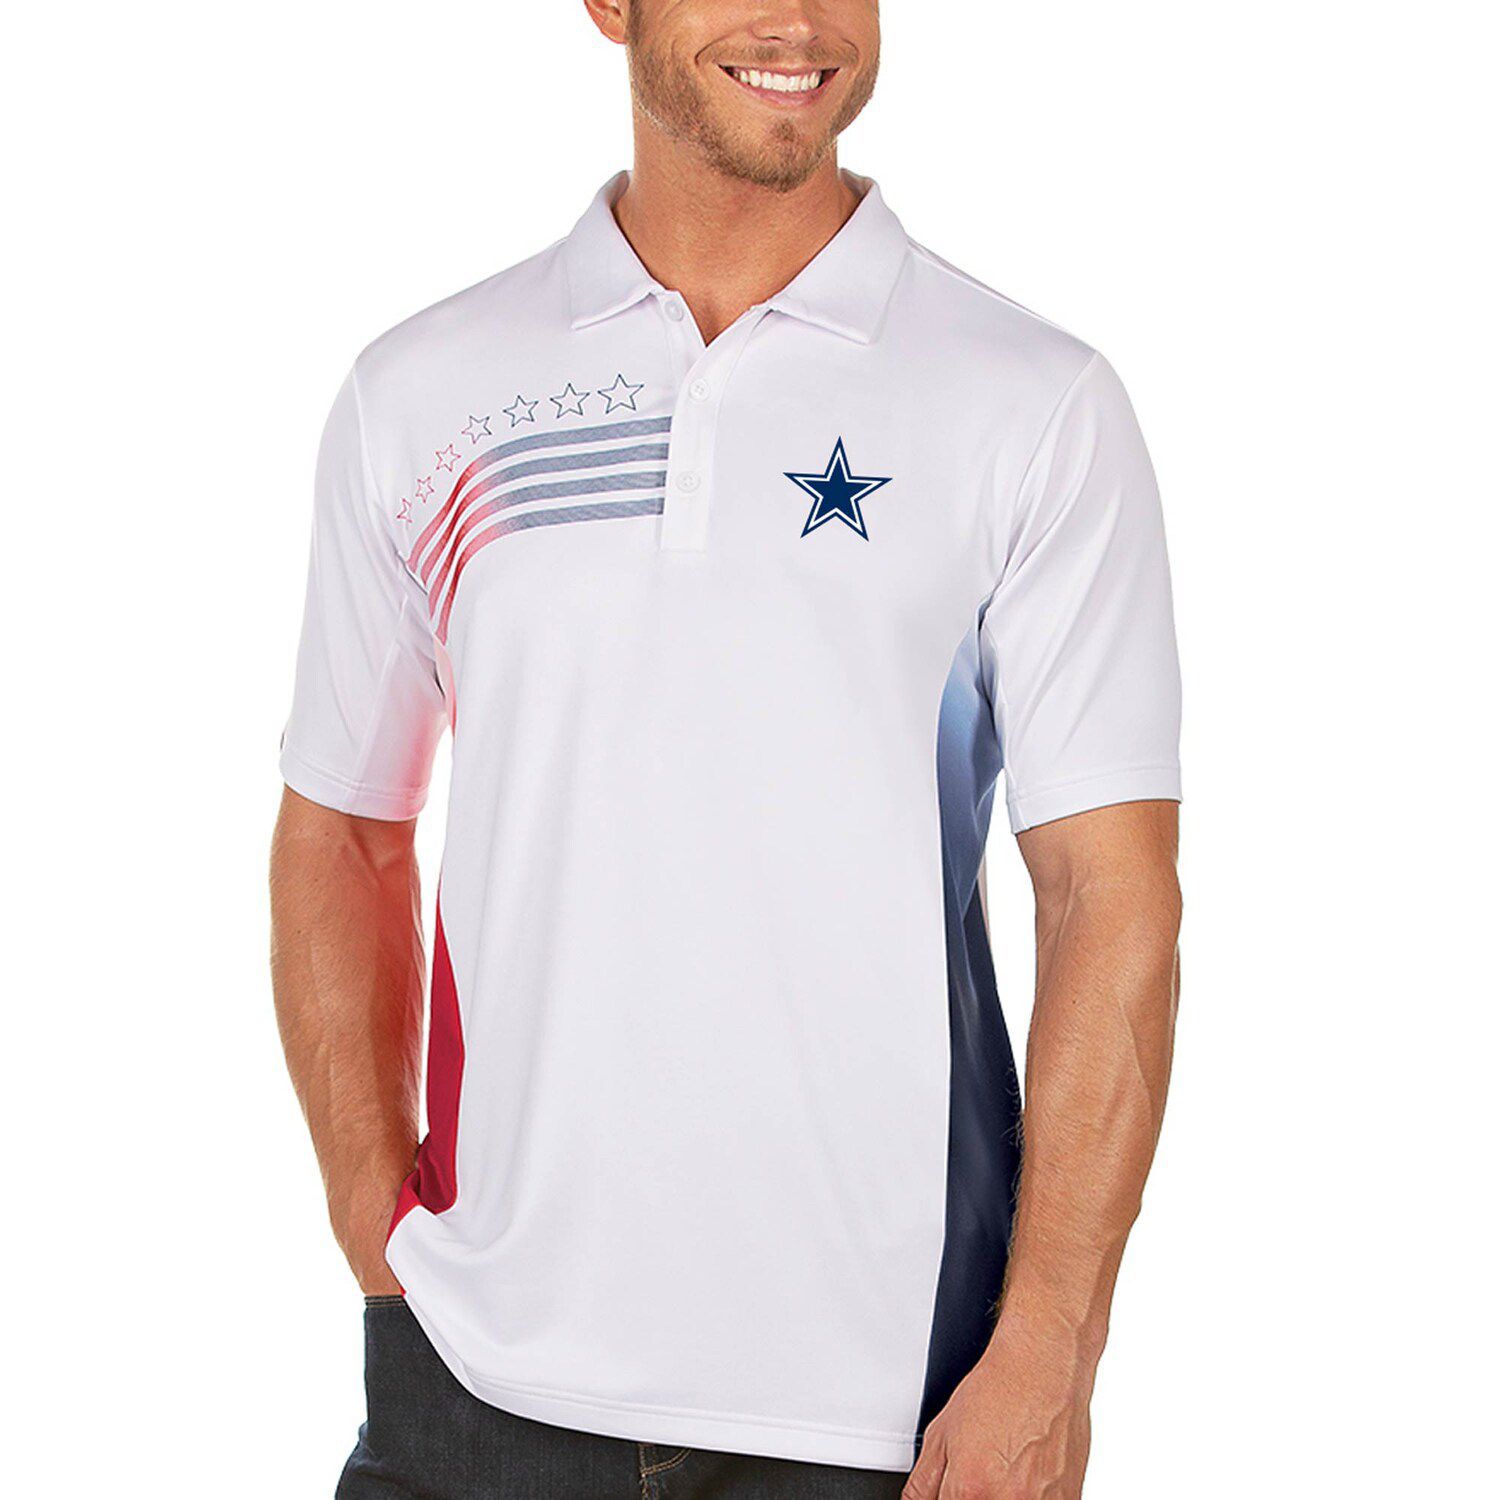 antigua men's polo shirts Online Sale, UP TO 71% OFF